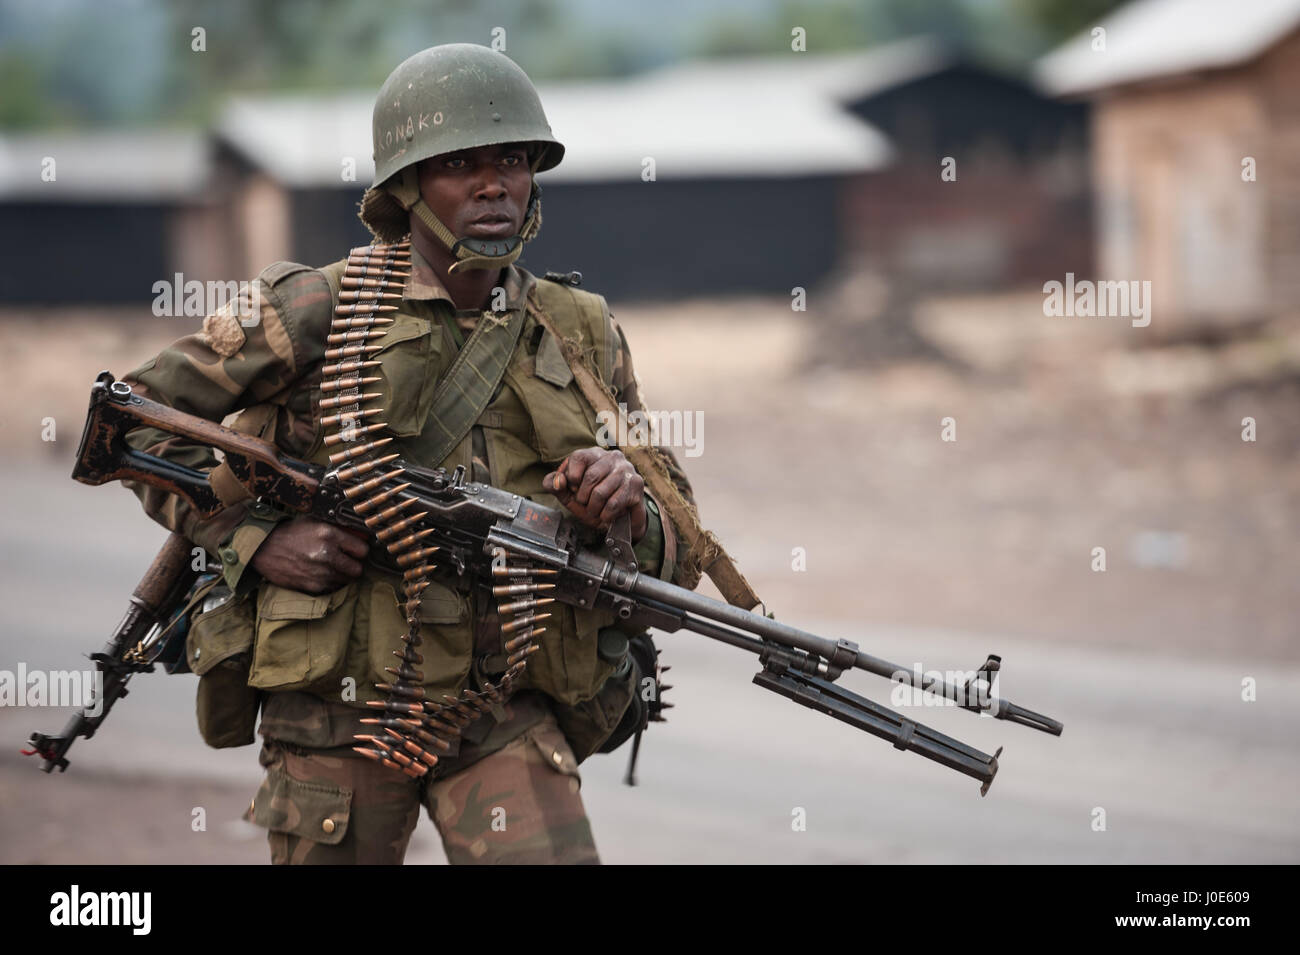 An FARDC soldier during operations against the M23 militia near Goma, eastern Democratic Republic of Congo (DRC) Stock Photo